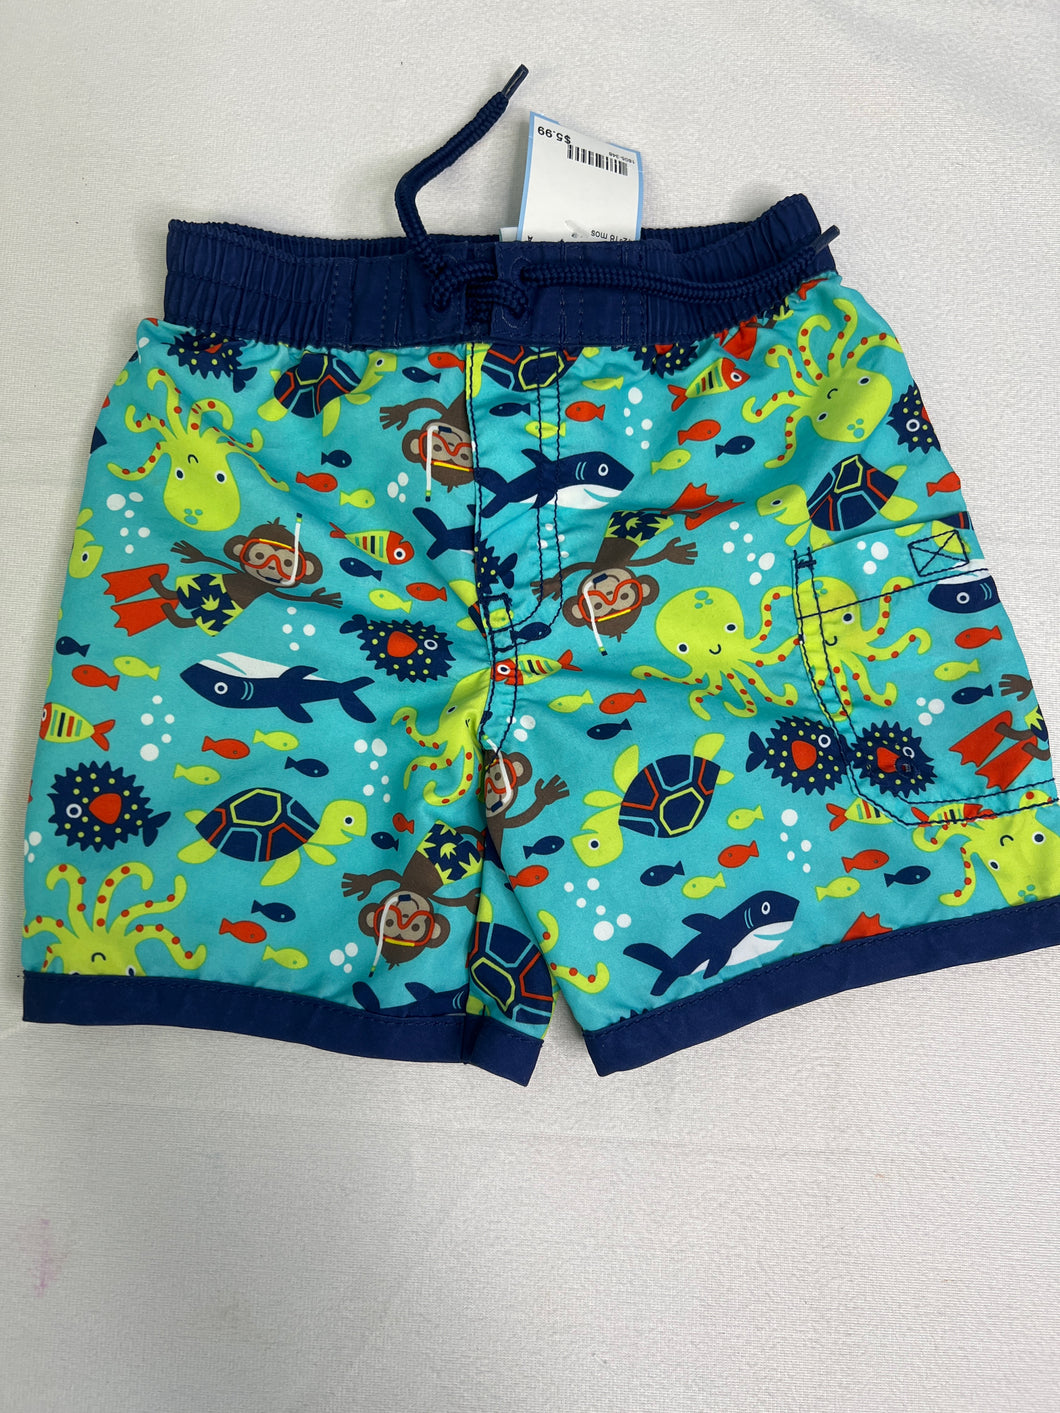 Boys 12-18 mos old navy swimsuit